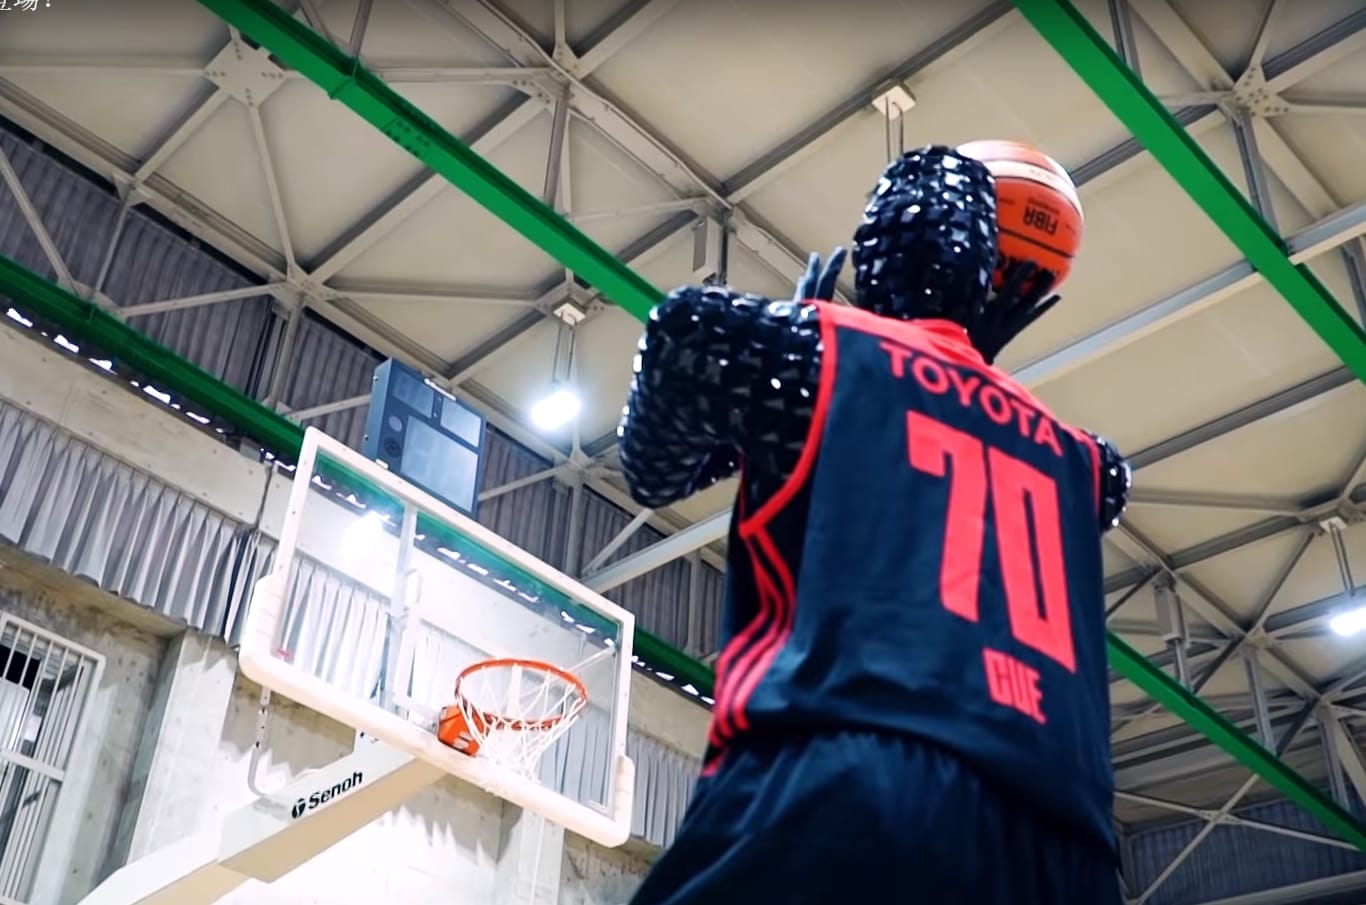 This basketball-playing robot good it could outshoot Stephen Curry